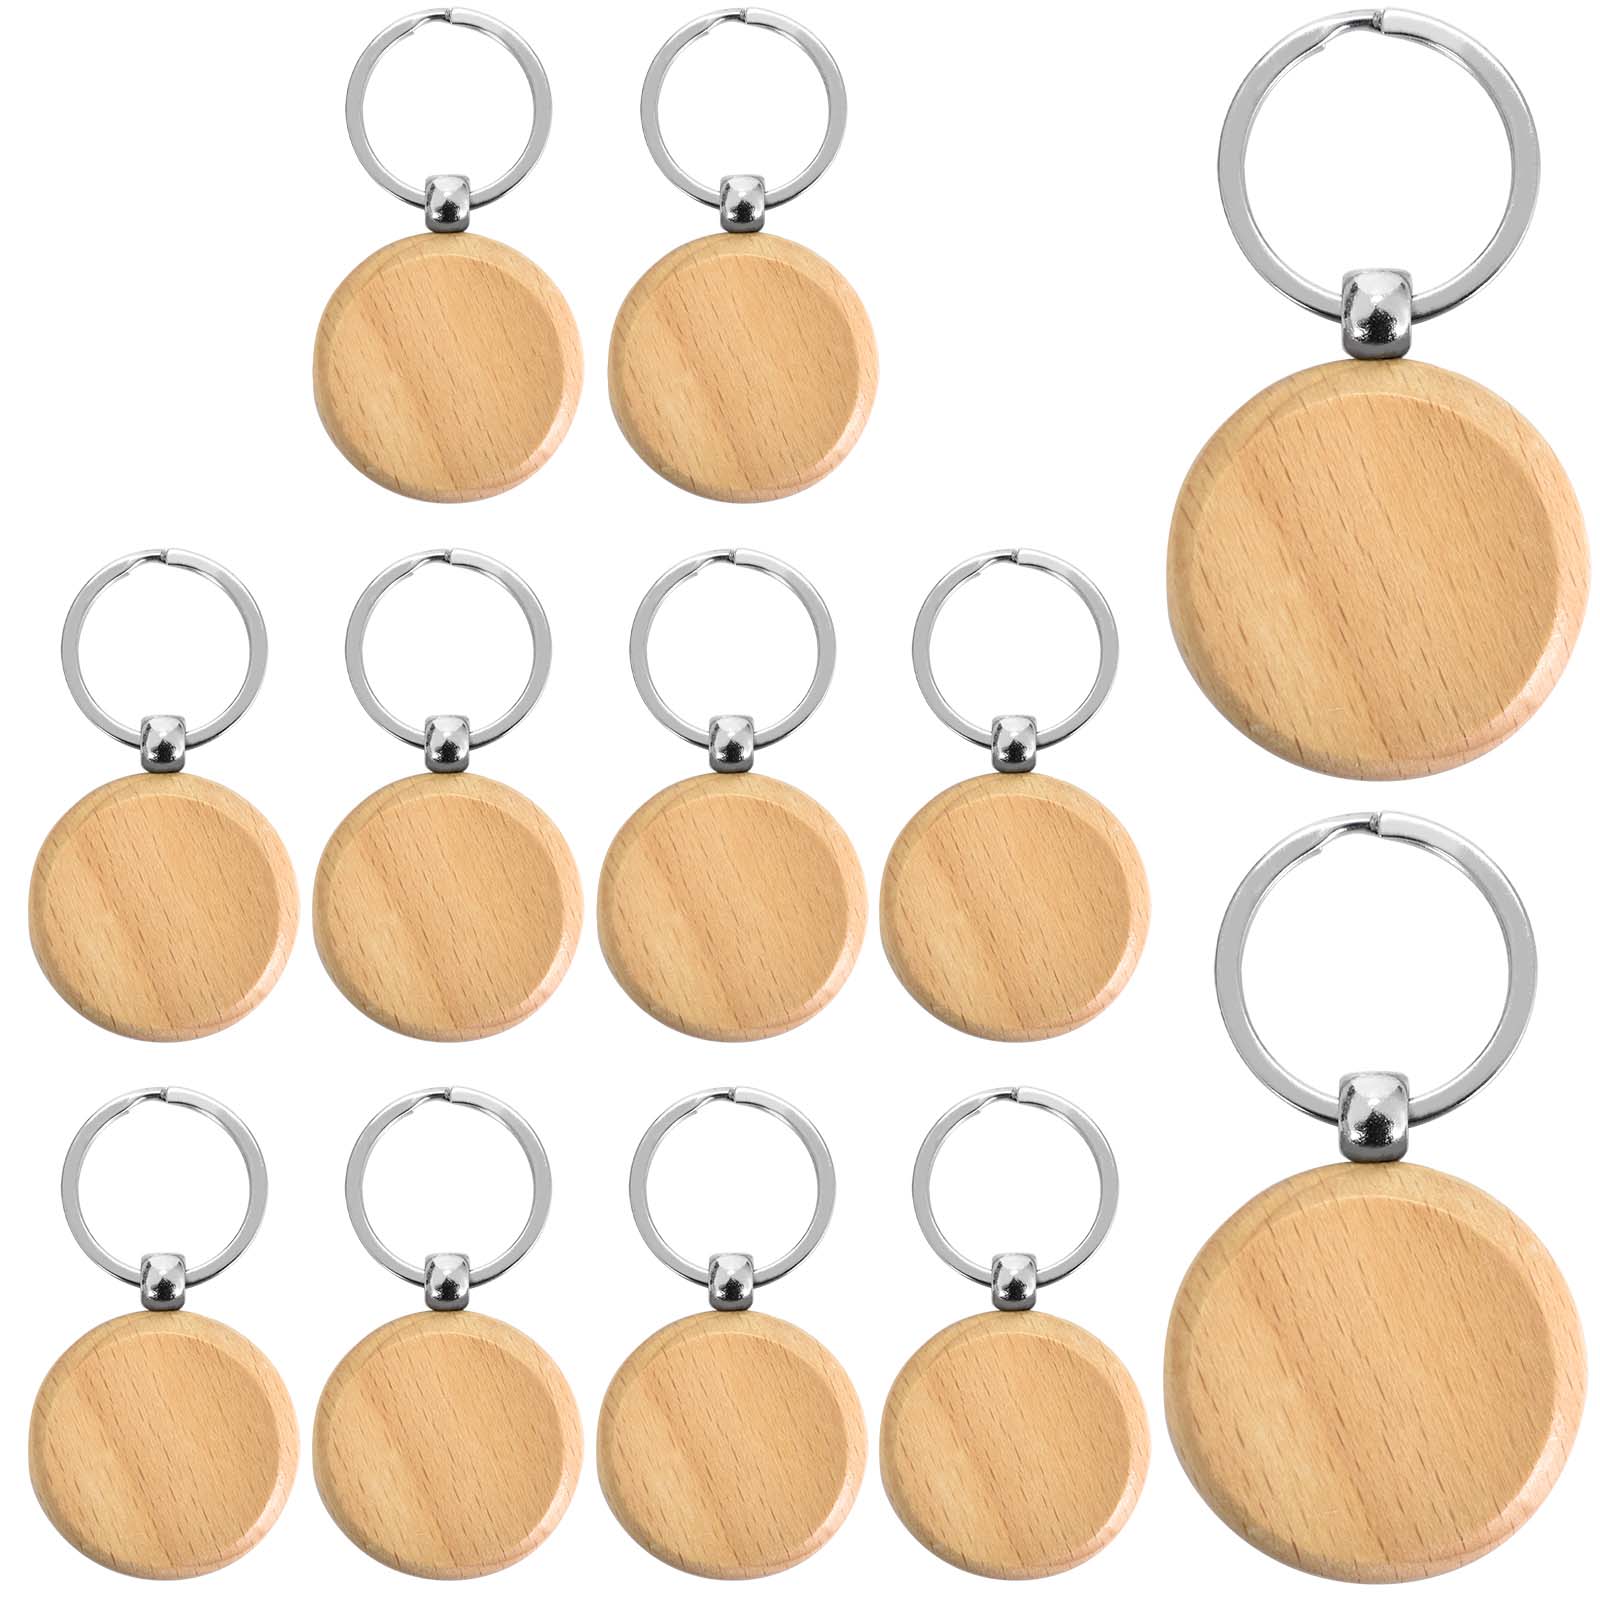 12pcs Round Wooden Key Ring | DIY Key Craft Supplies | Low Price | Free Shipping | Our Store